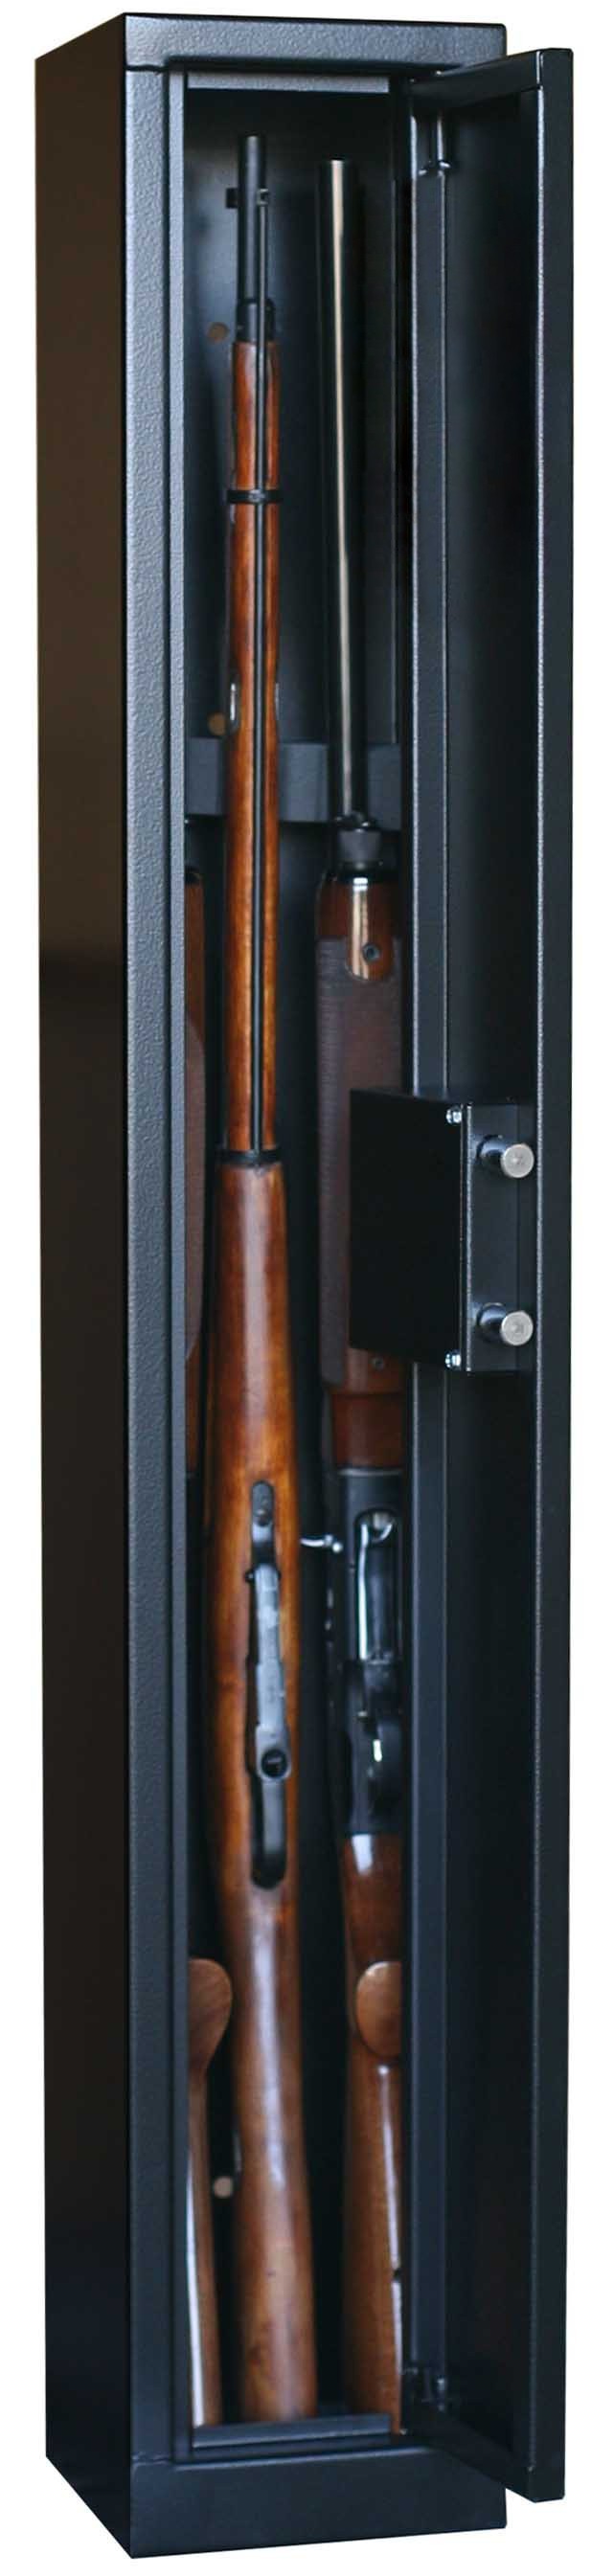 Armoire forte Fortify Steï Safe 3 armes, MADE IN CHASSE - Equipements de chasse